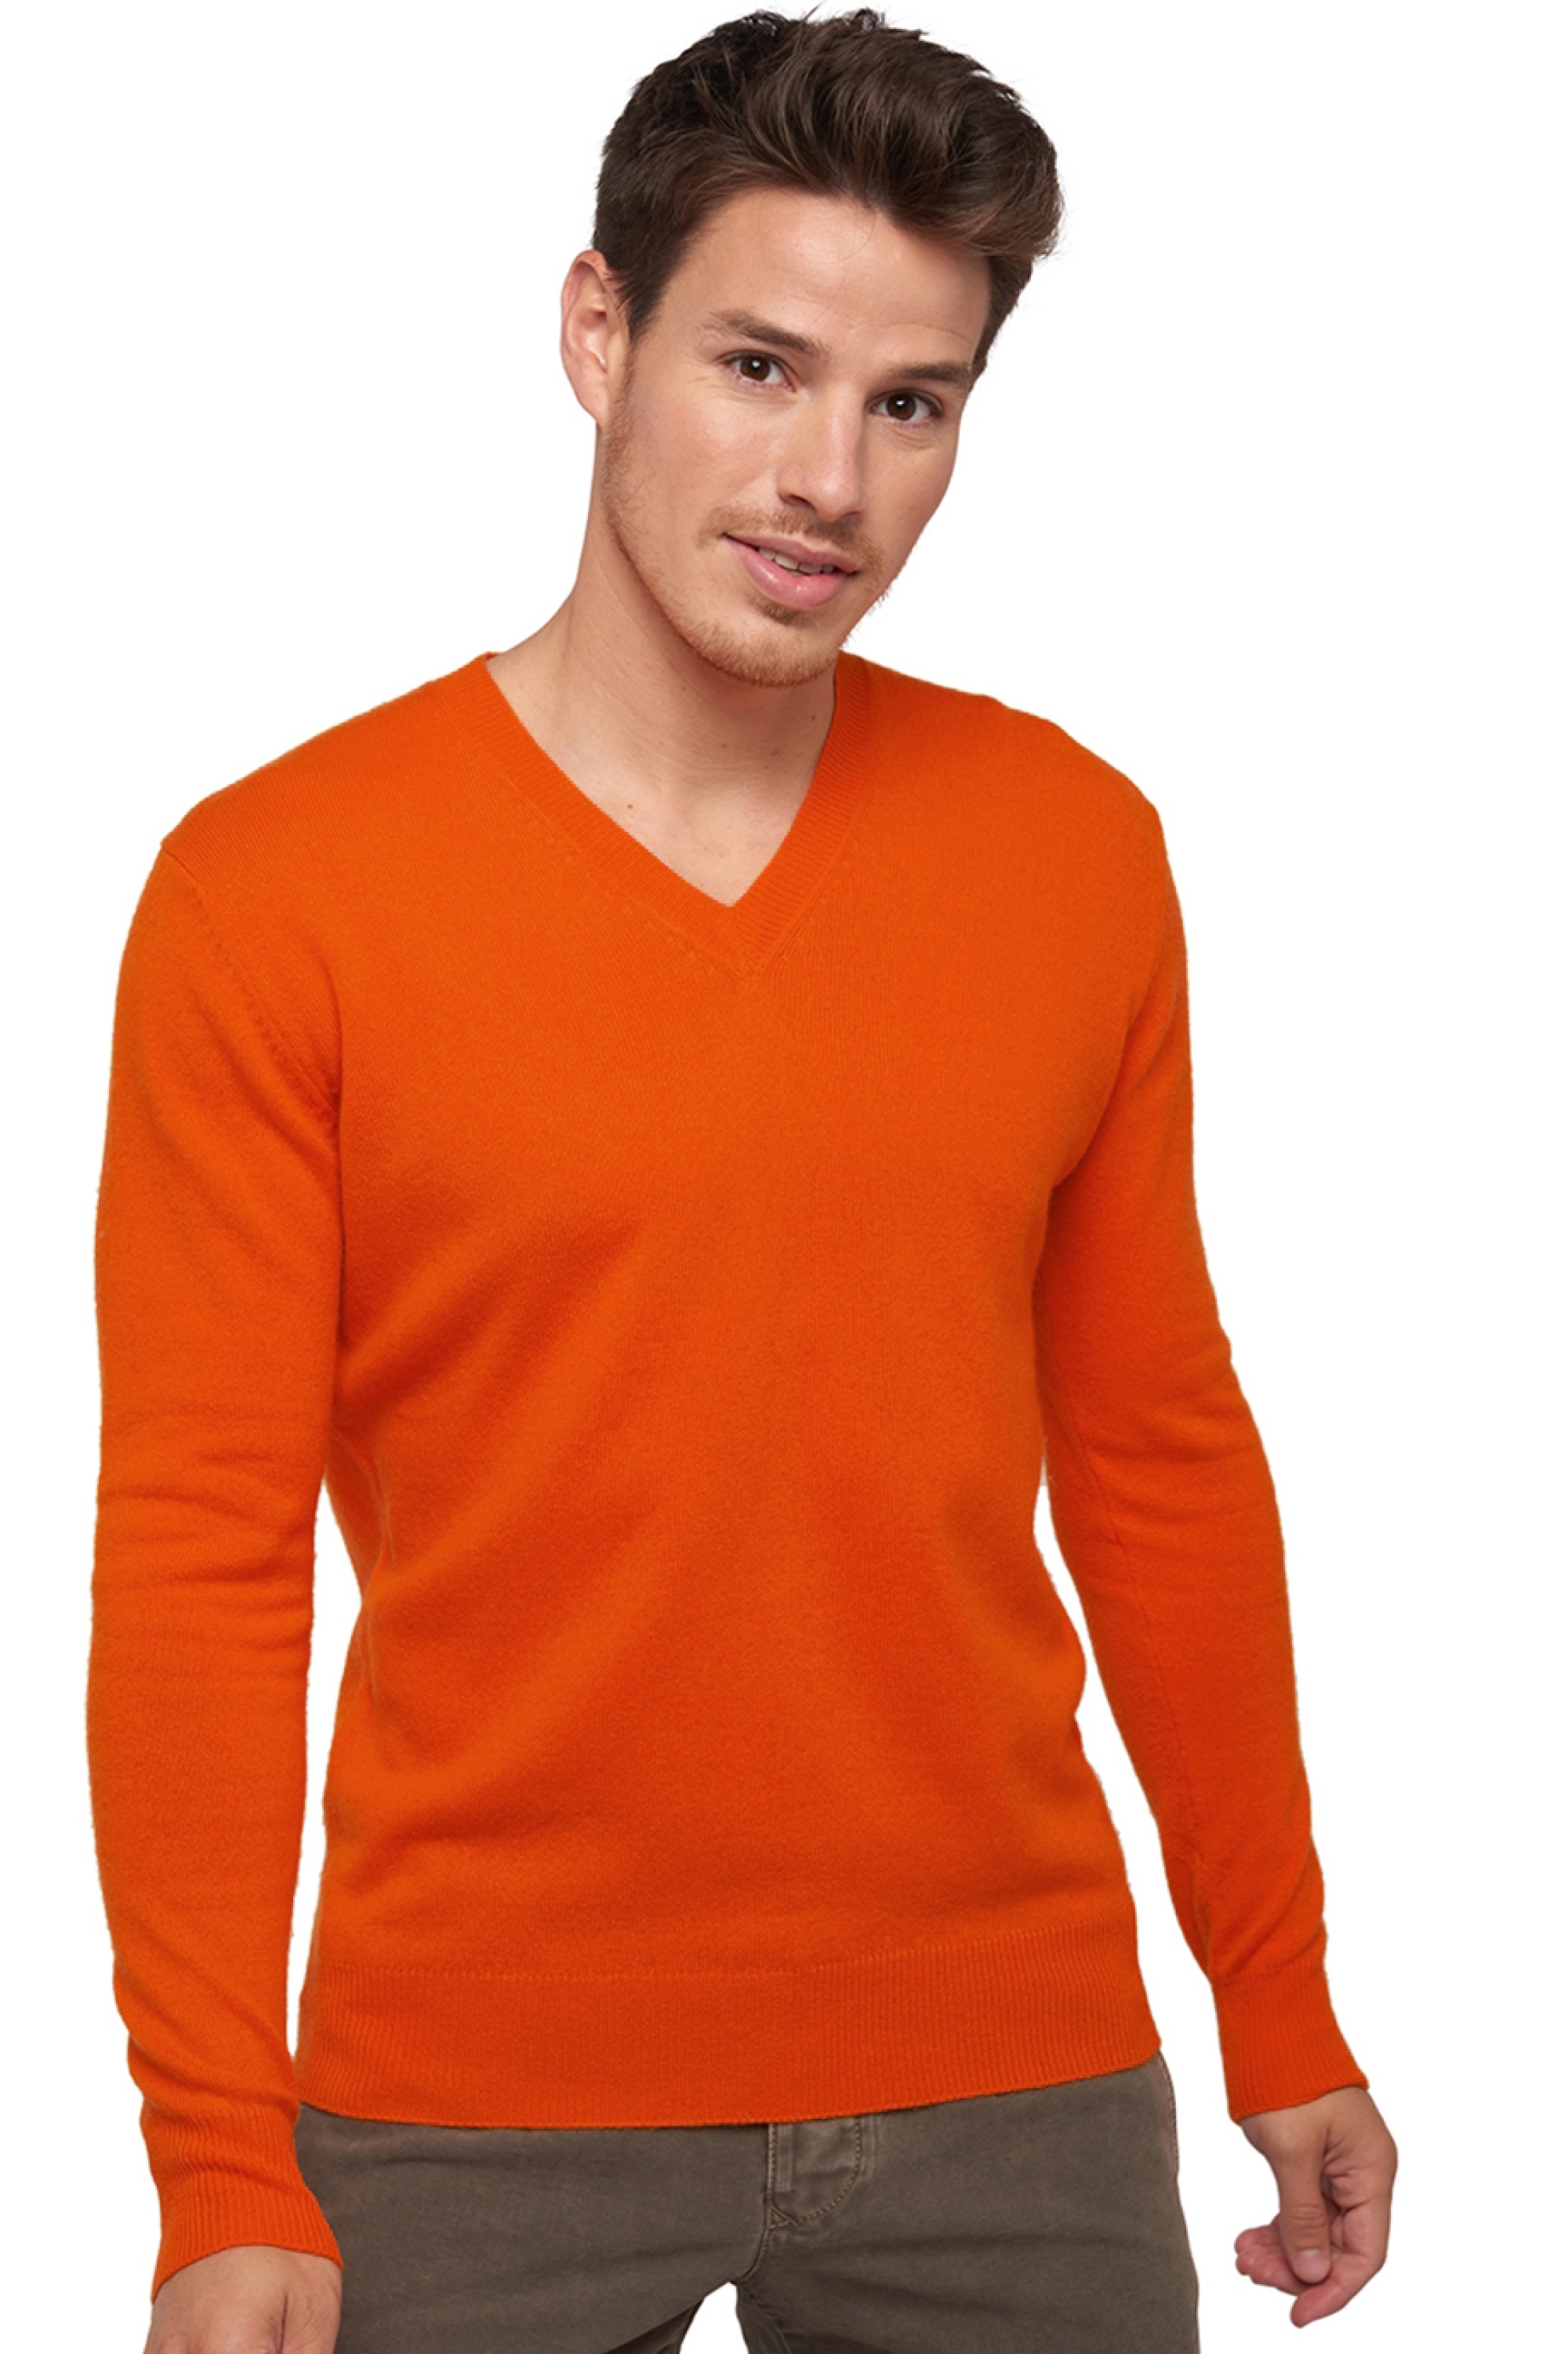 Cashmere men low prices tor first satsuma s